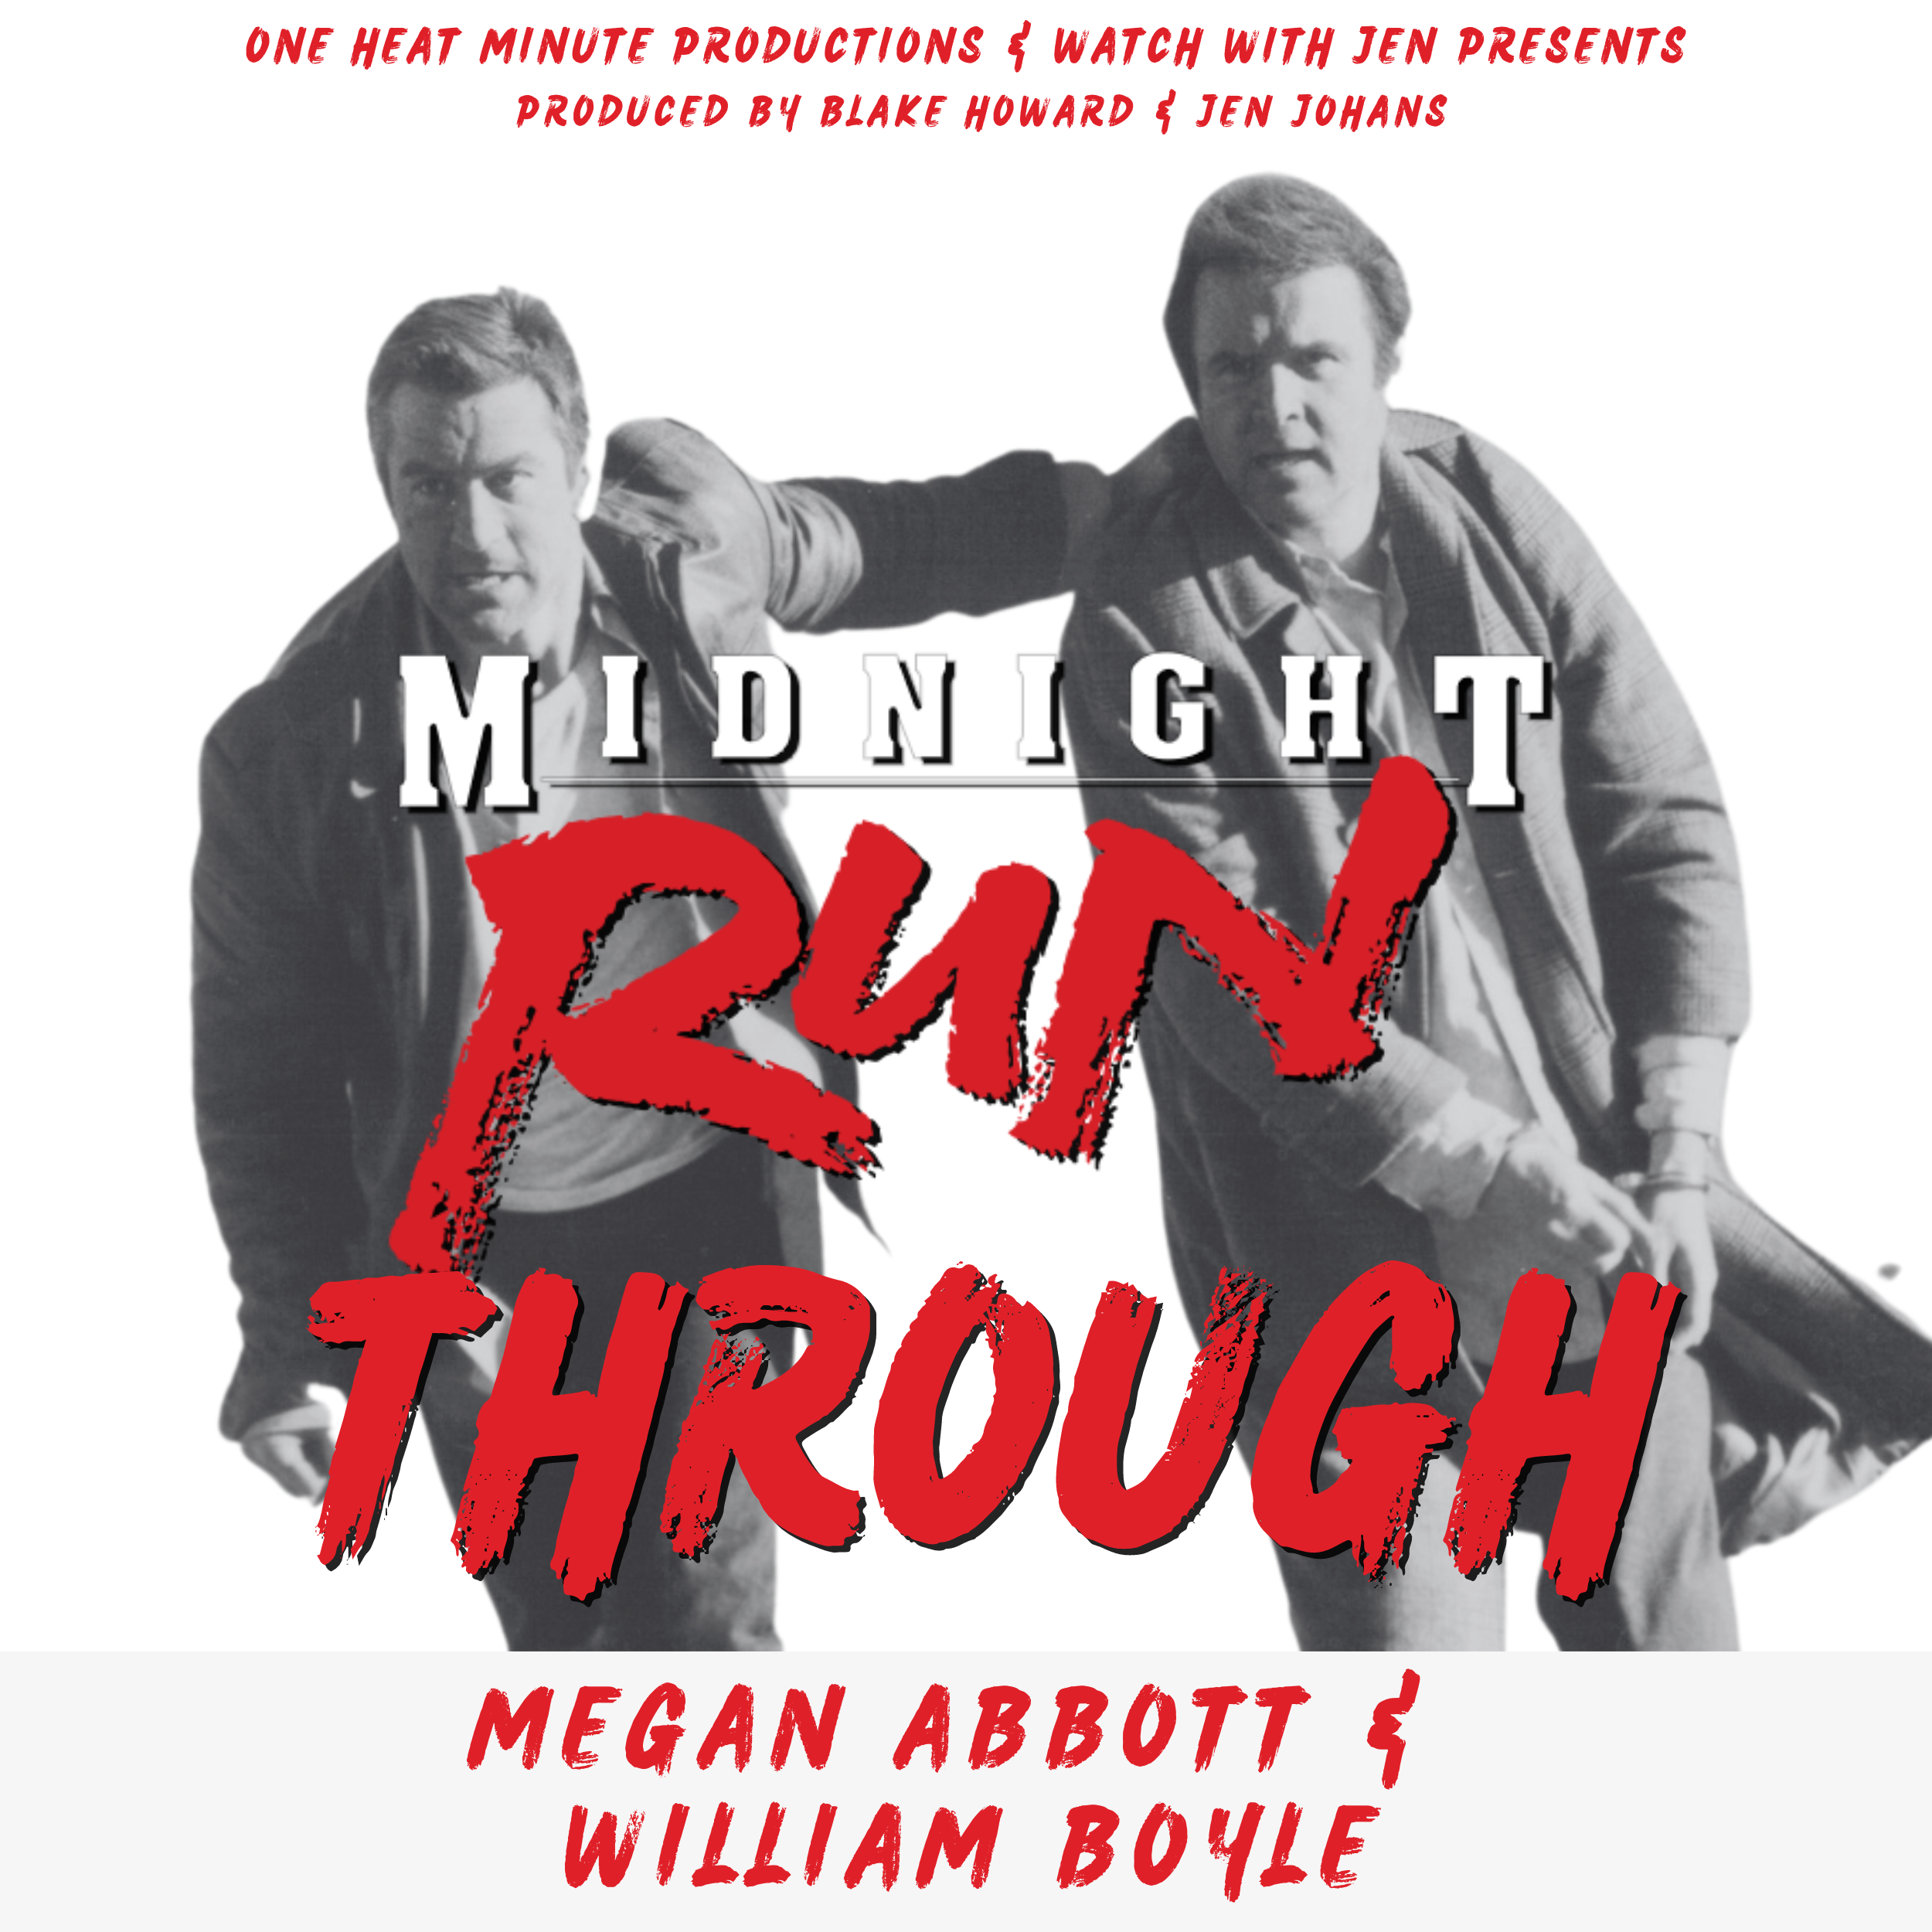 MIDNIGHT RUN-THROUGH - Episode 6 with Megan Abbott & William Boyle (From One Heat Minute Productions & Watch With Jen)